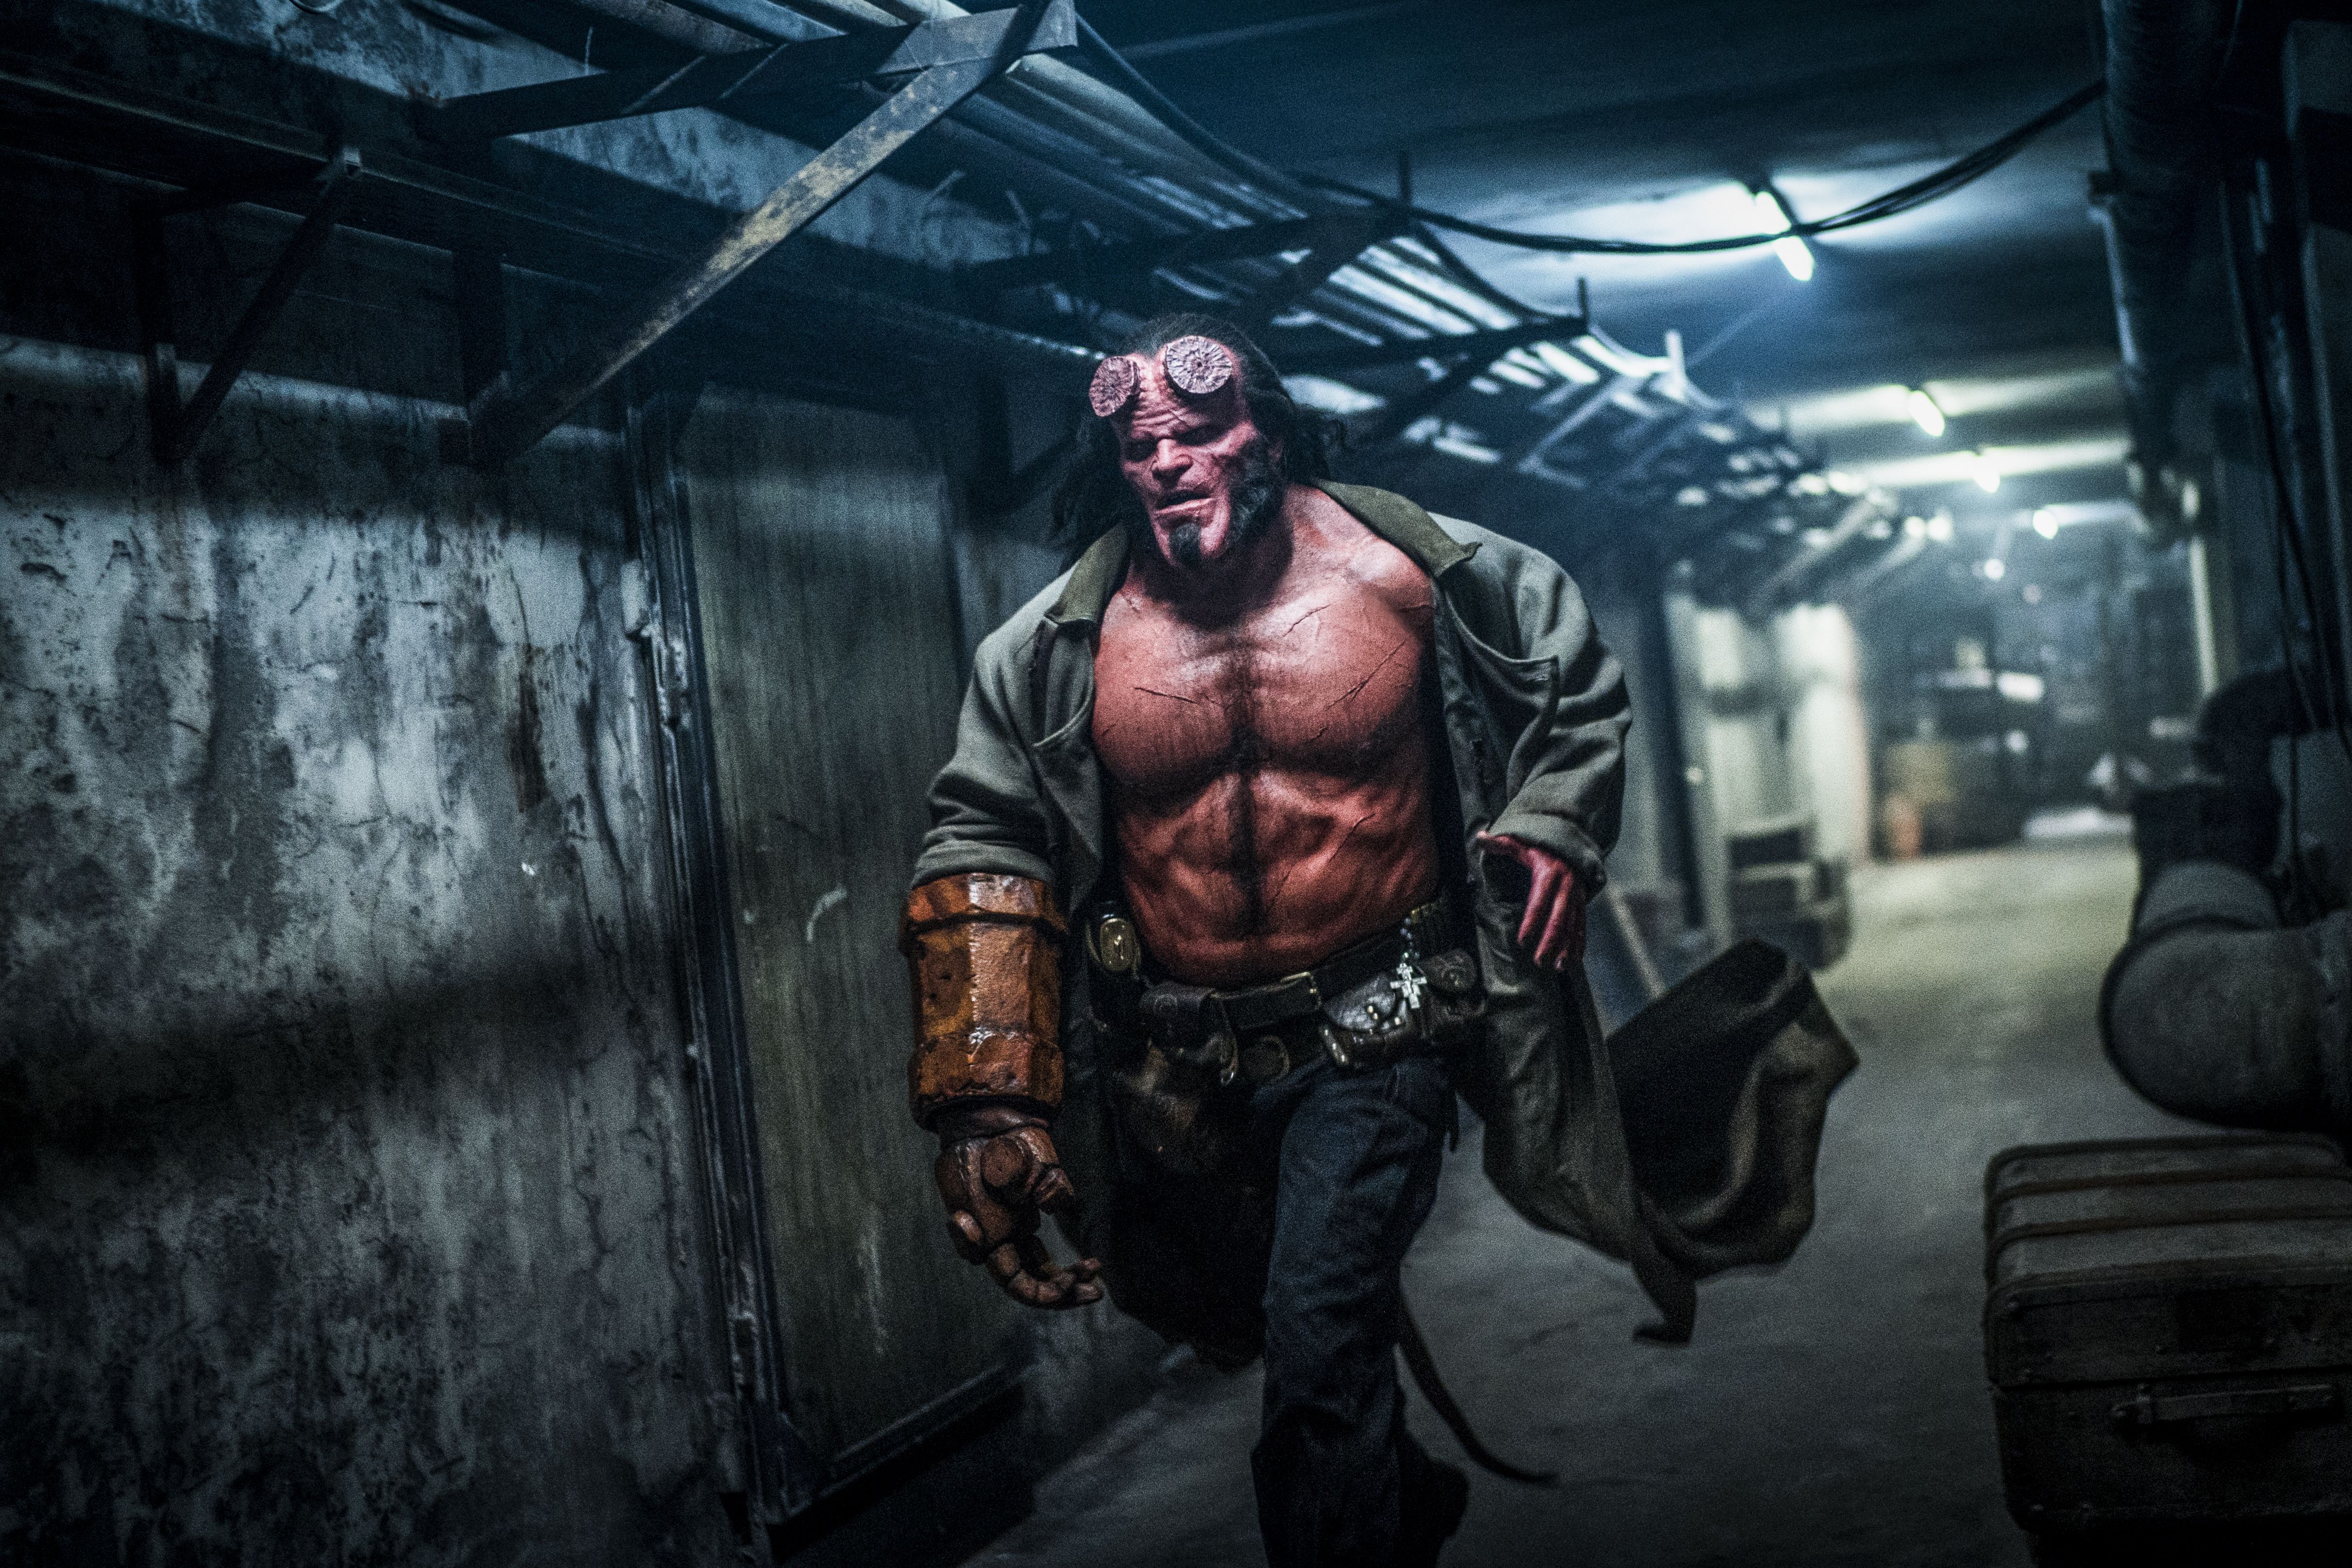 David Harbour Hellboy Movie Poster Image Wallpapers